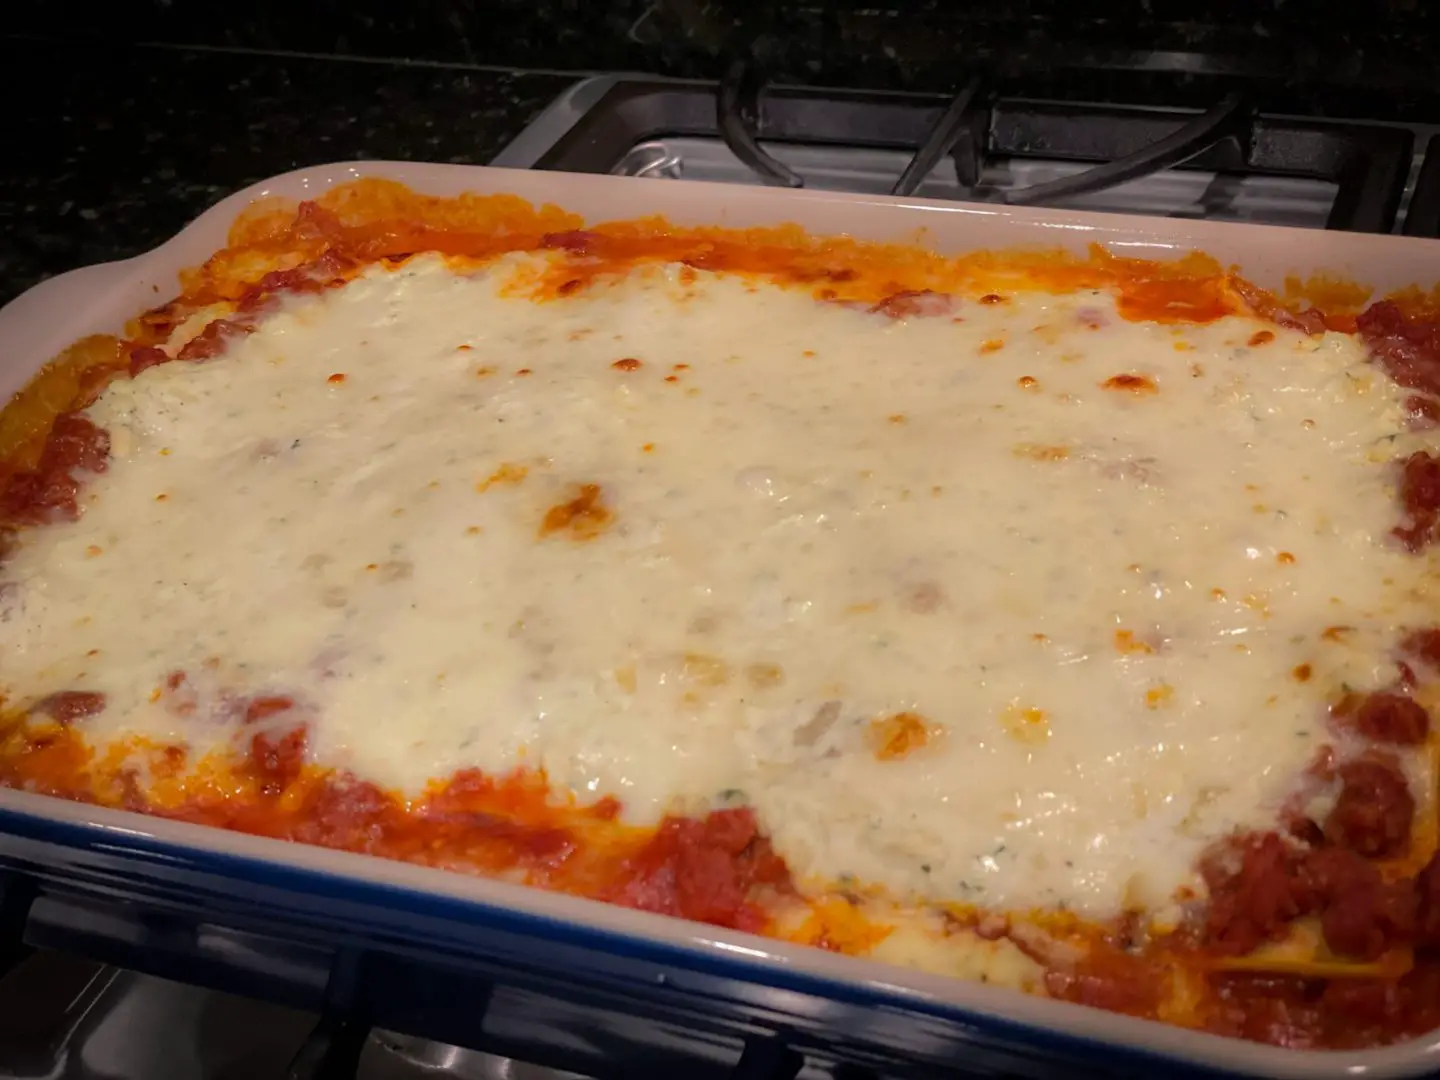 Cooked lasagne out of the oven.